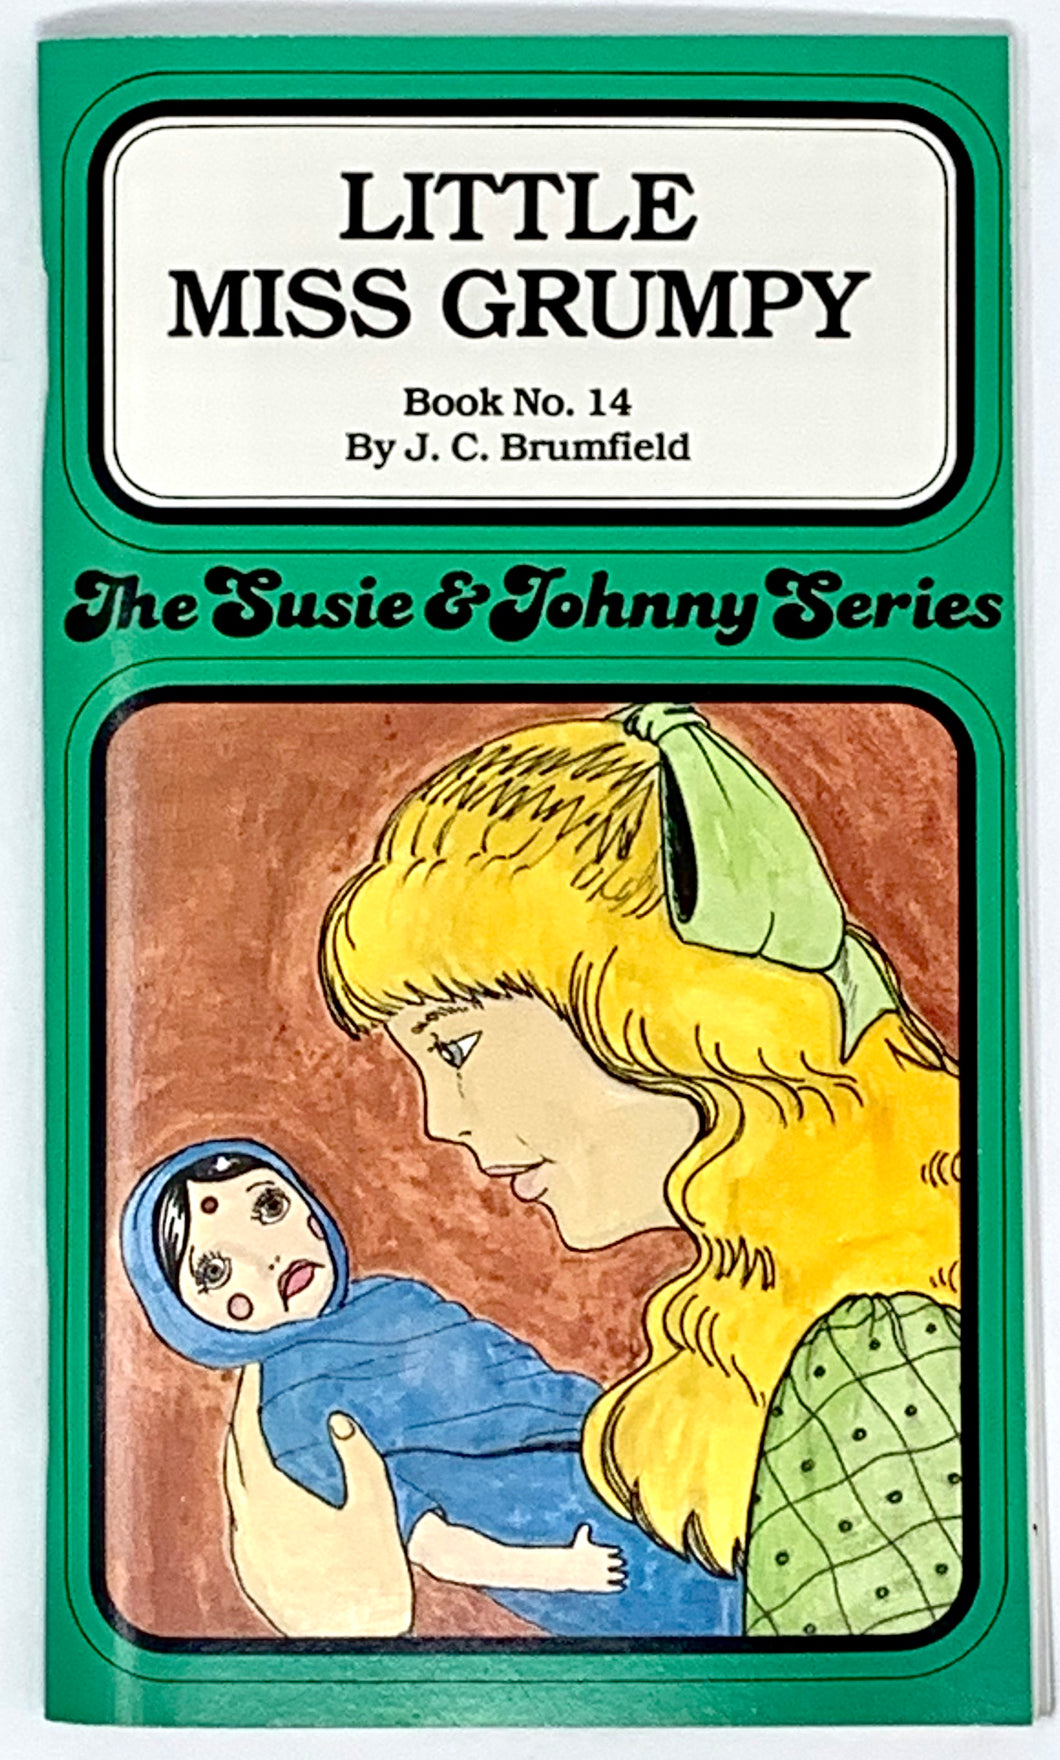 THE SUSIE & JOHNNY SERIES BOOK #14 